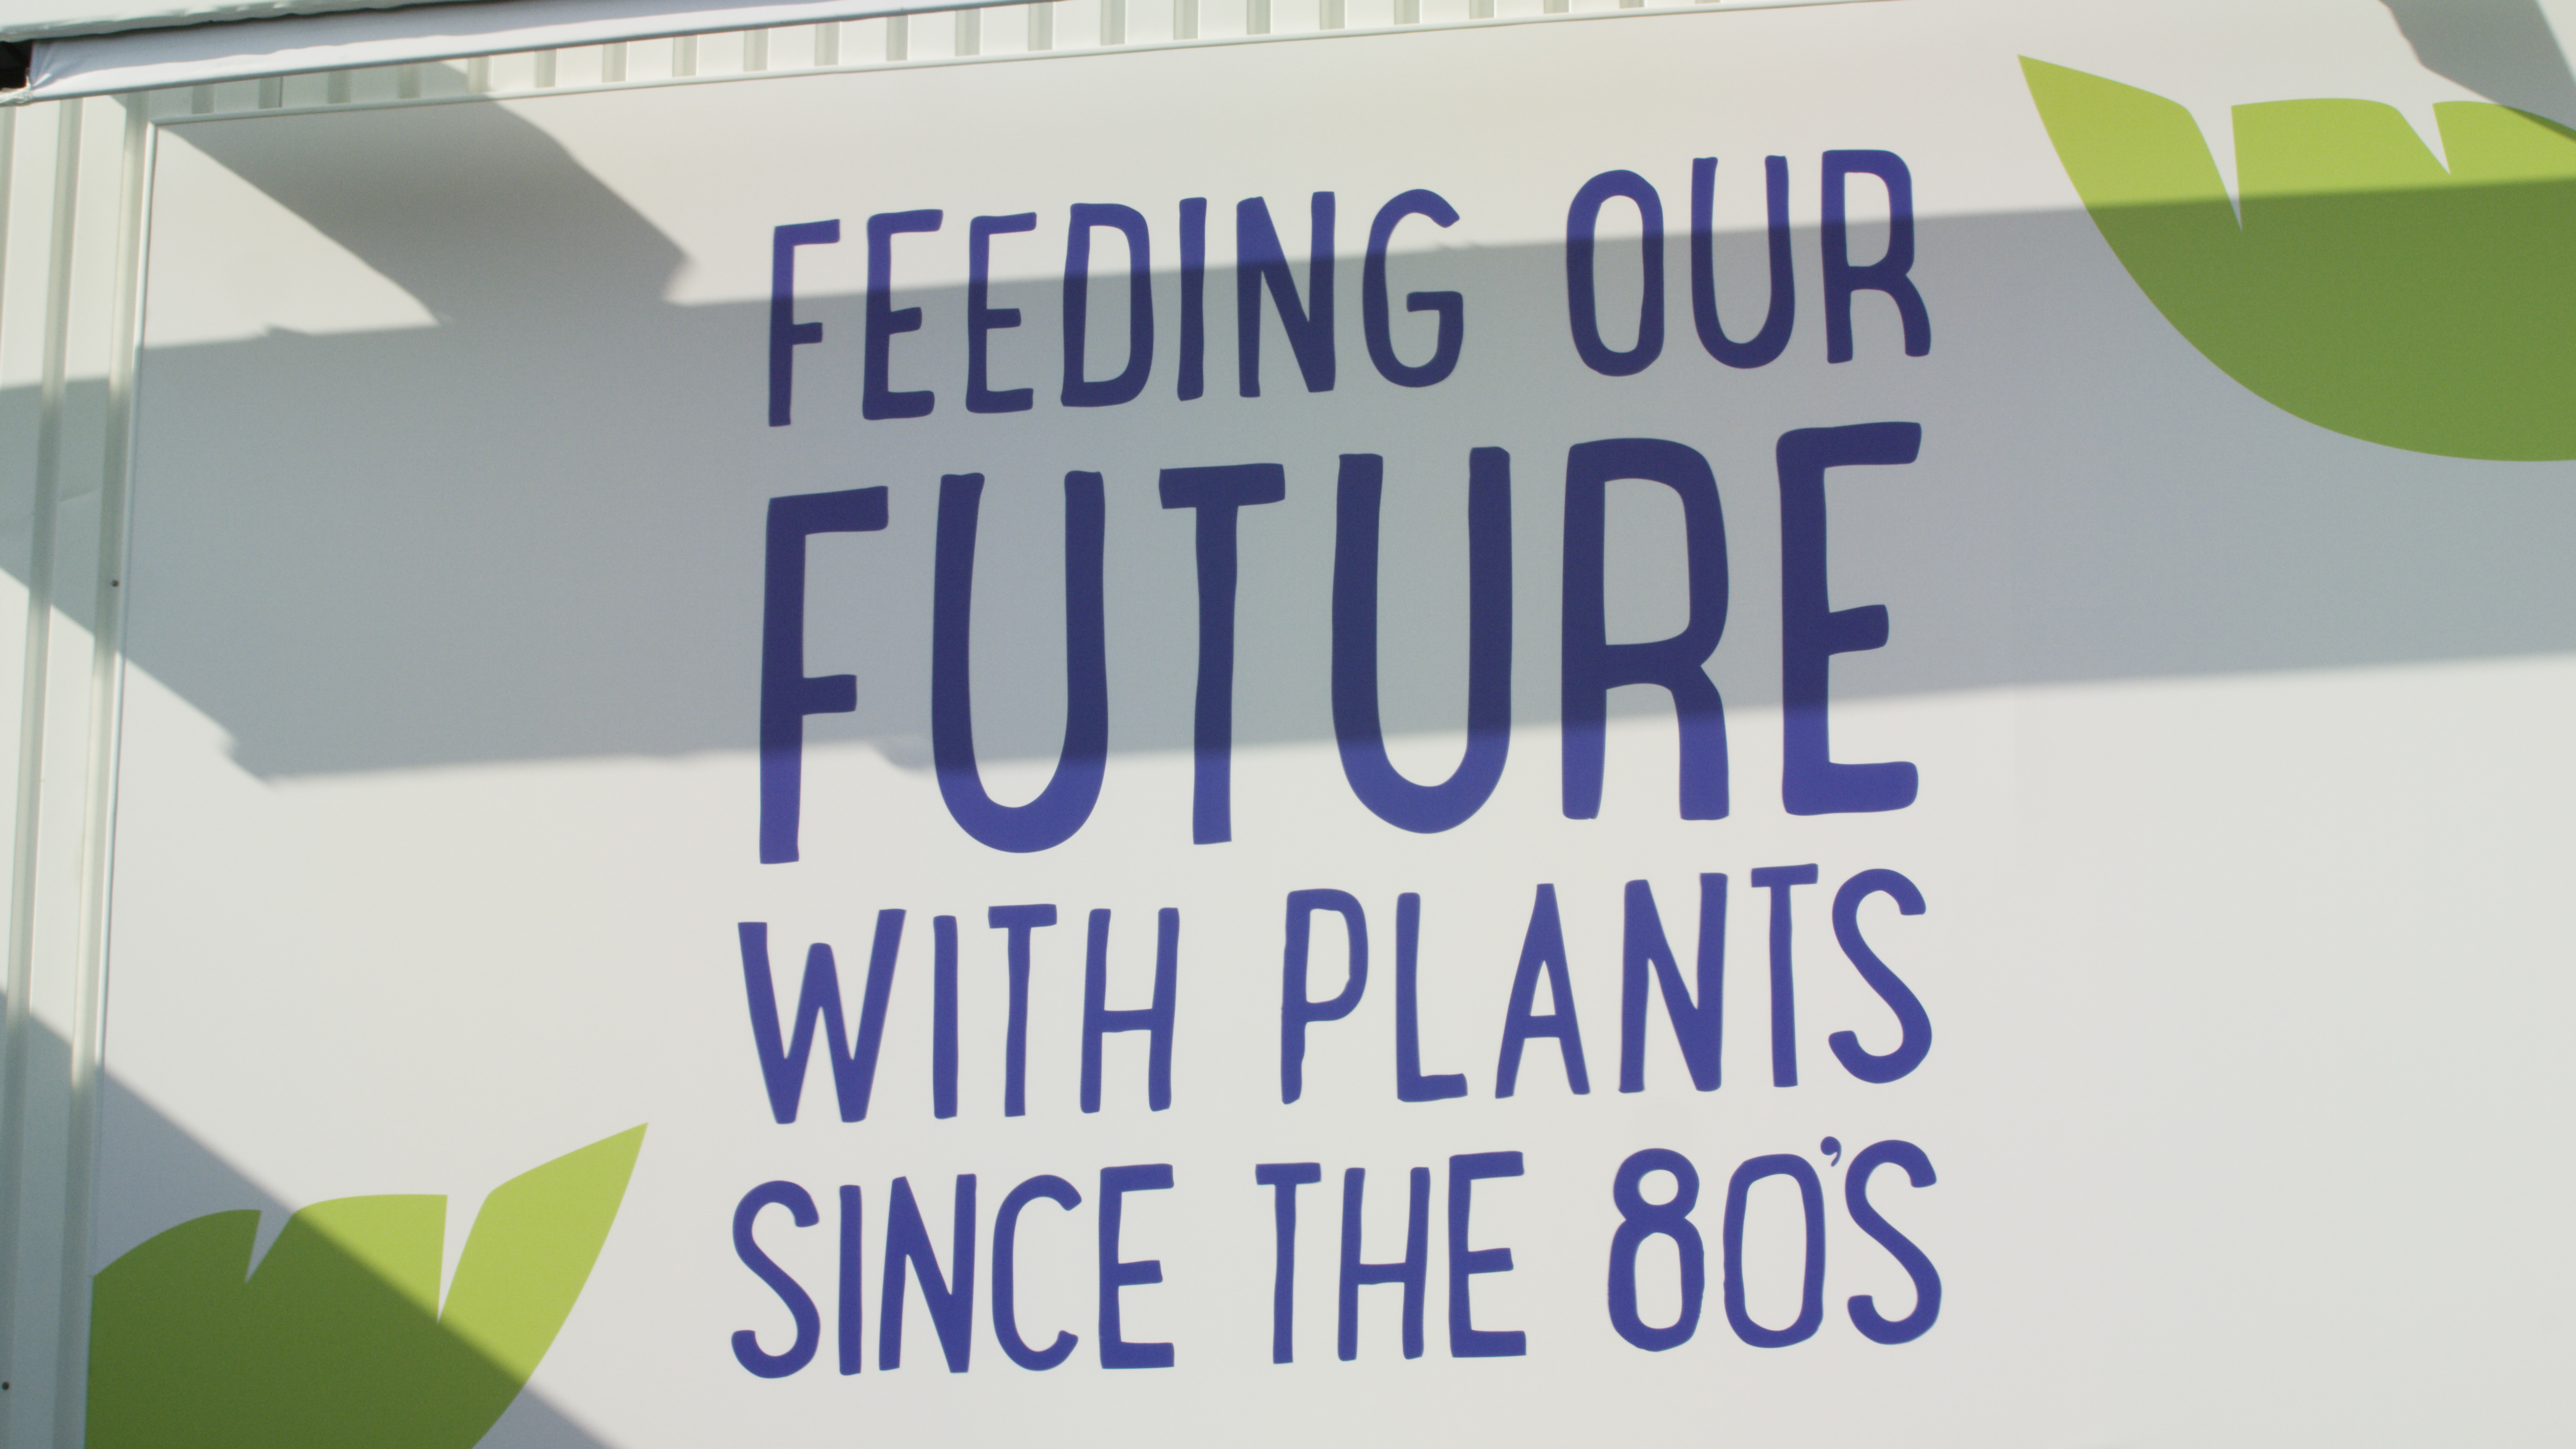 Feeding our Future with Plants